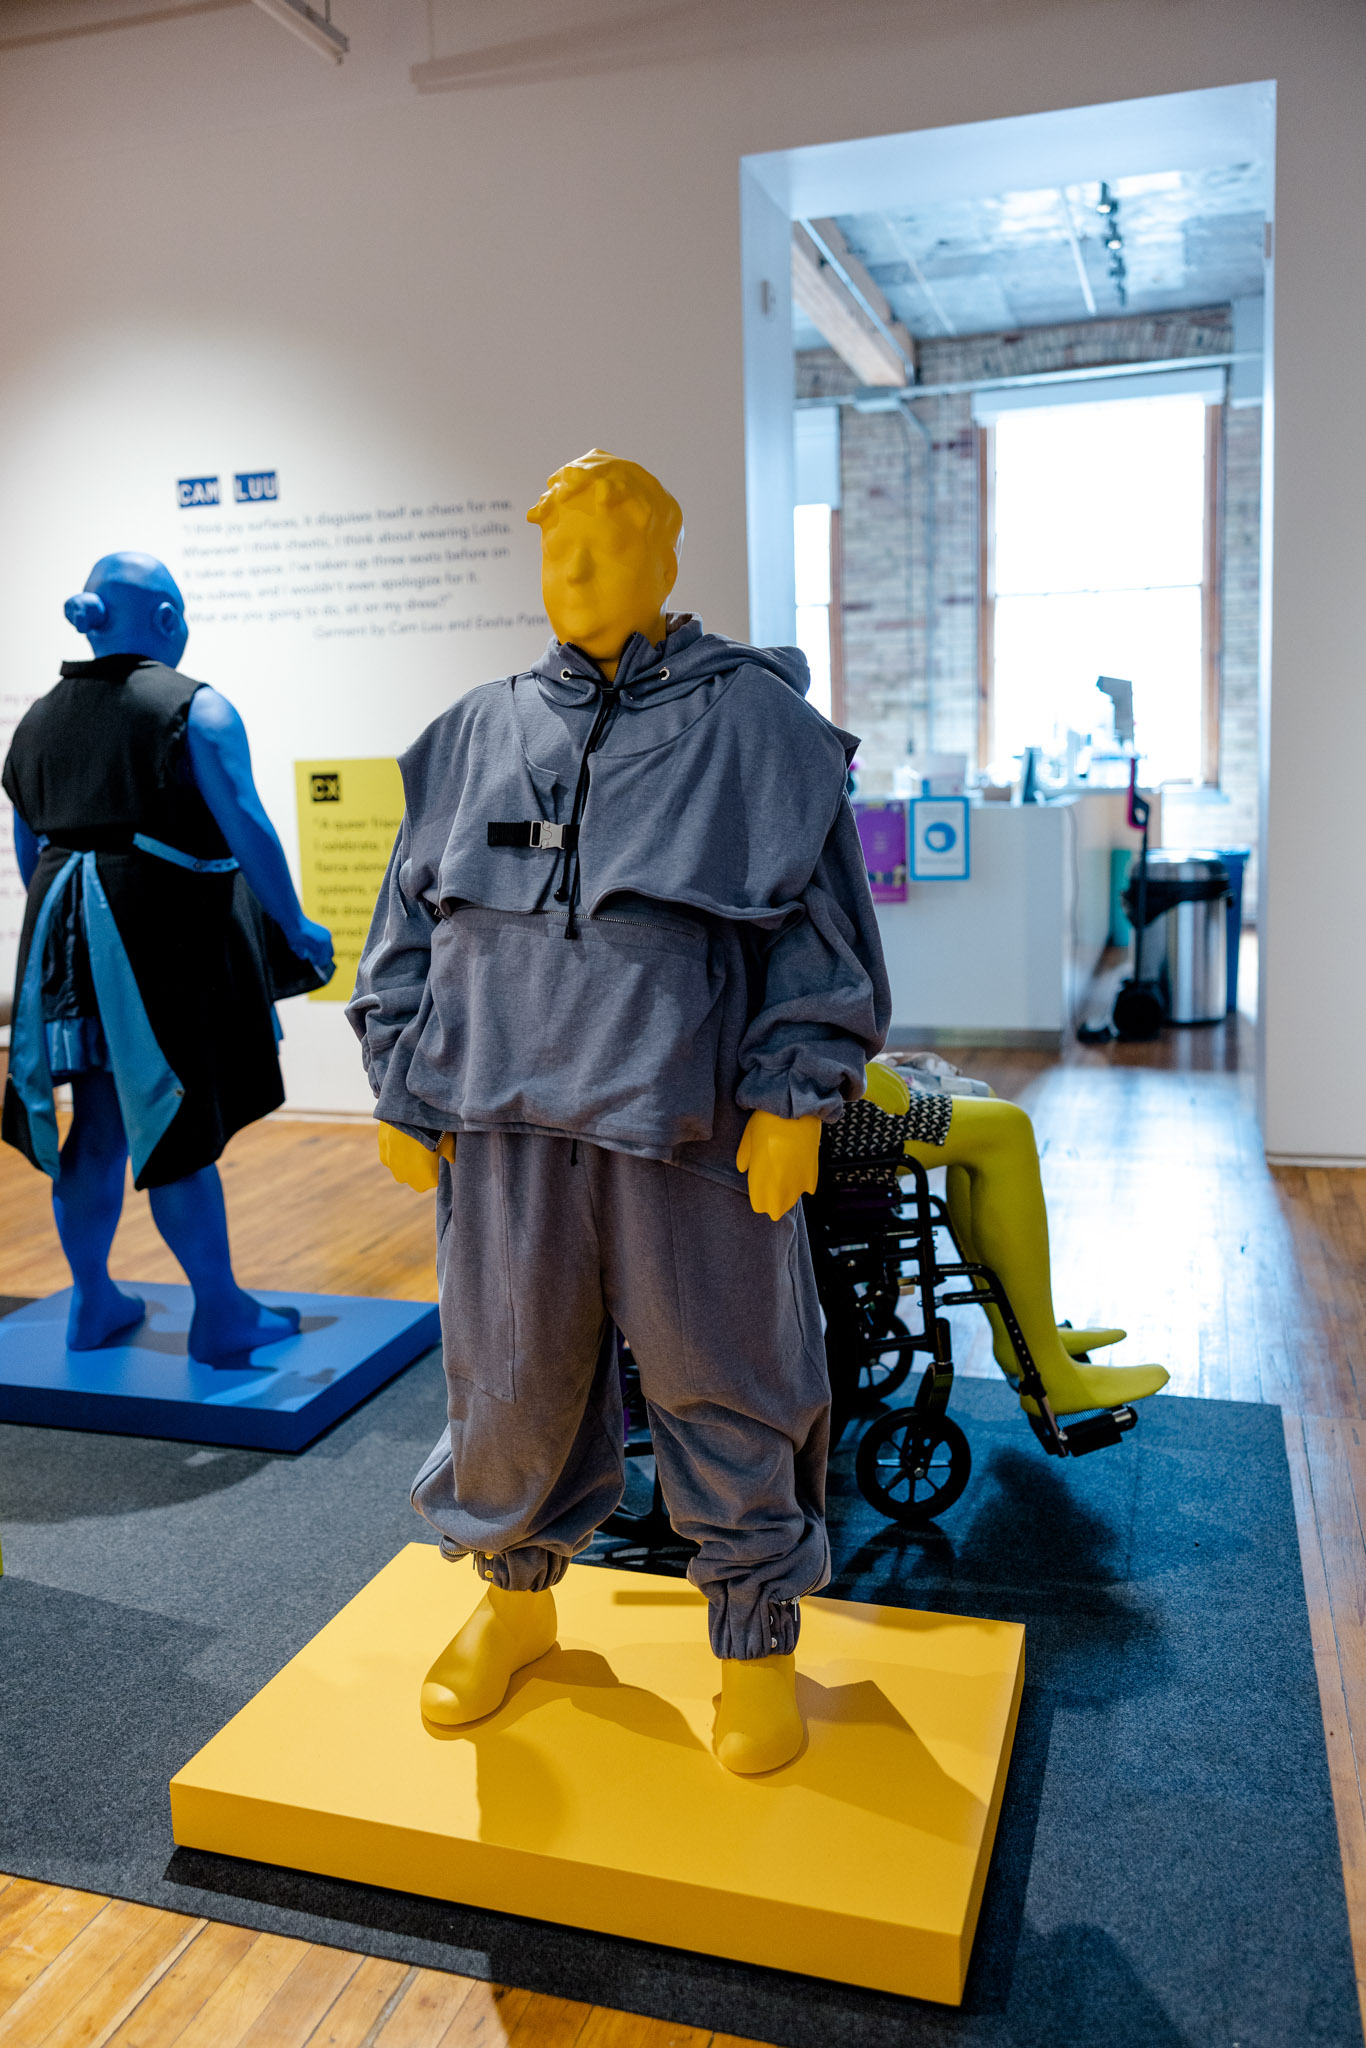 A bright yellow mannequin stands in a gallery setting wearing a blue jumpsuit. 